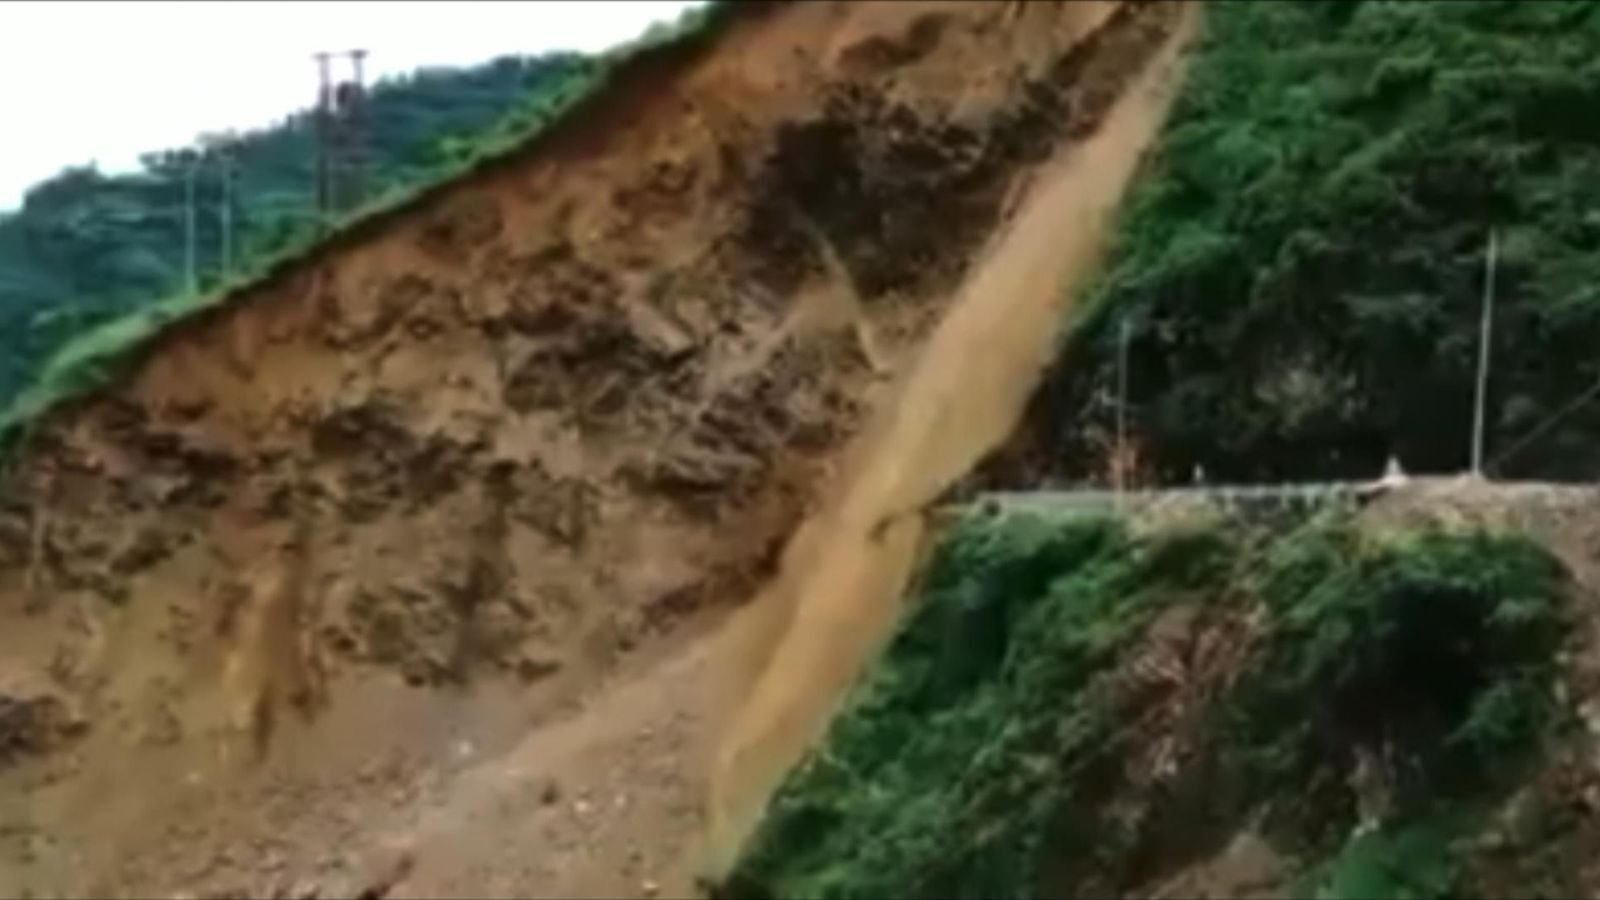 A stretch of road collapses due to a landslide in the Sirmaur district in Himachal Pradesh, India.